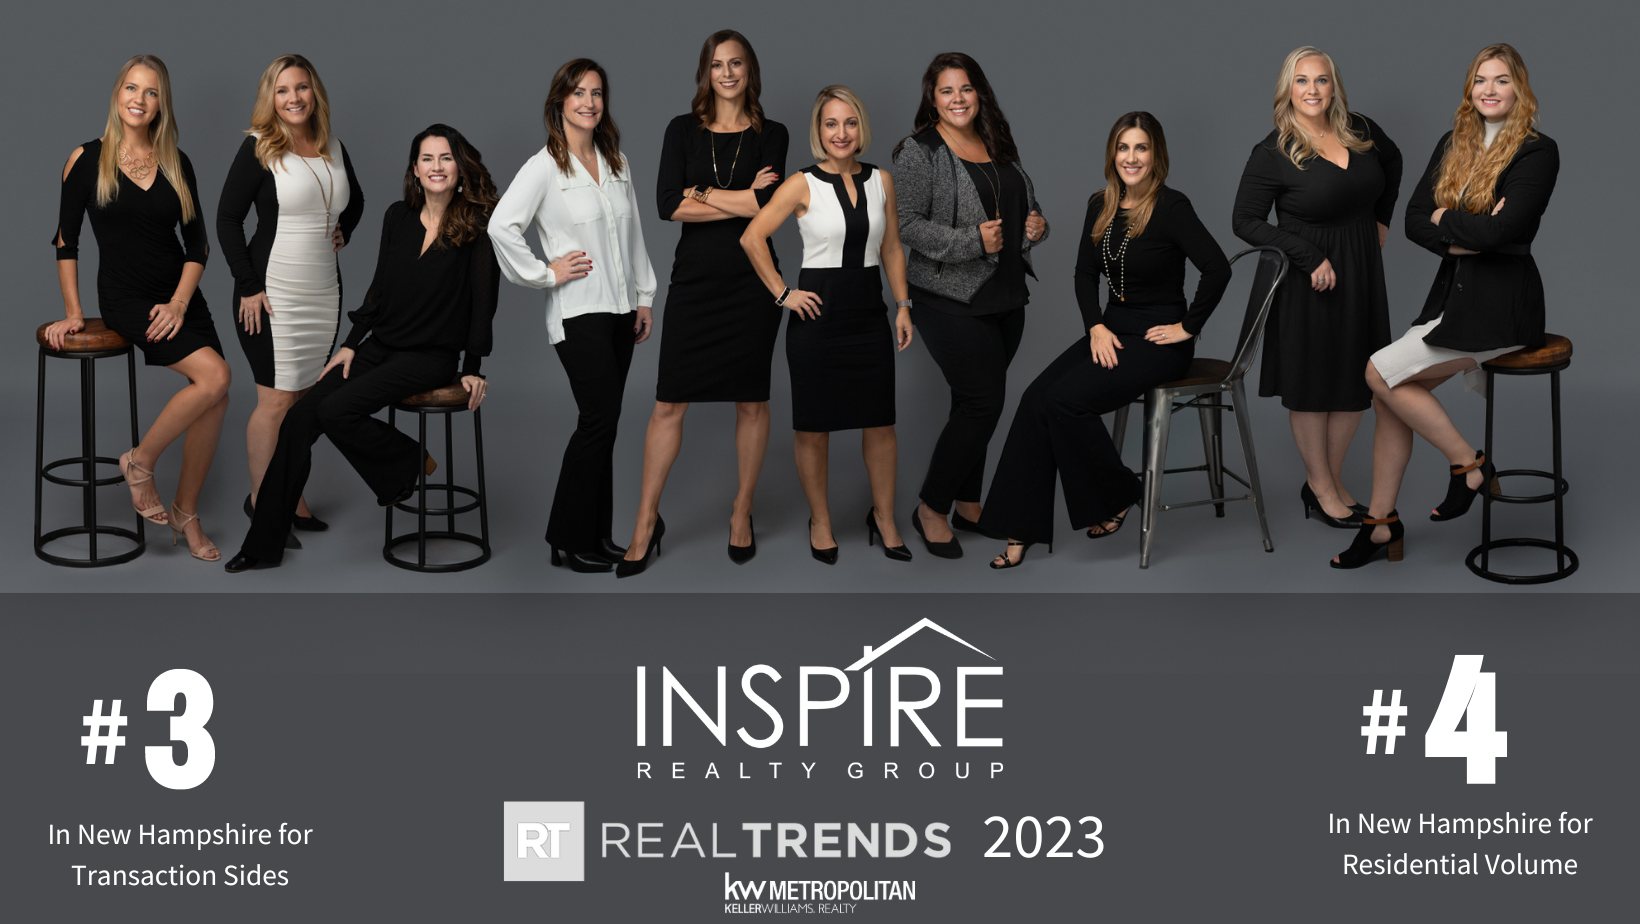 Exciting News for Inspire Realty Group